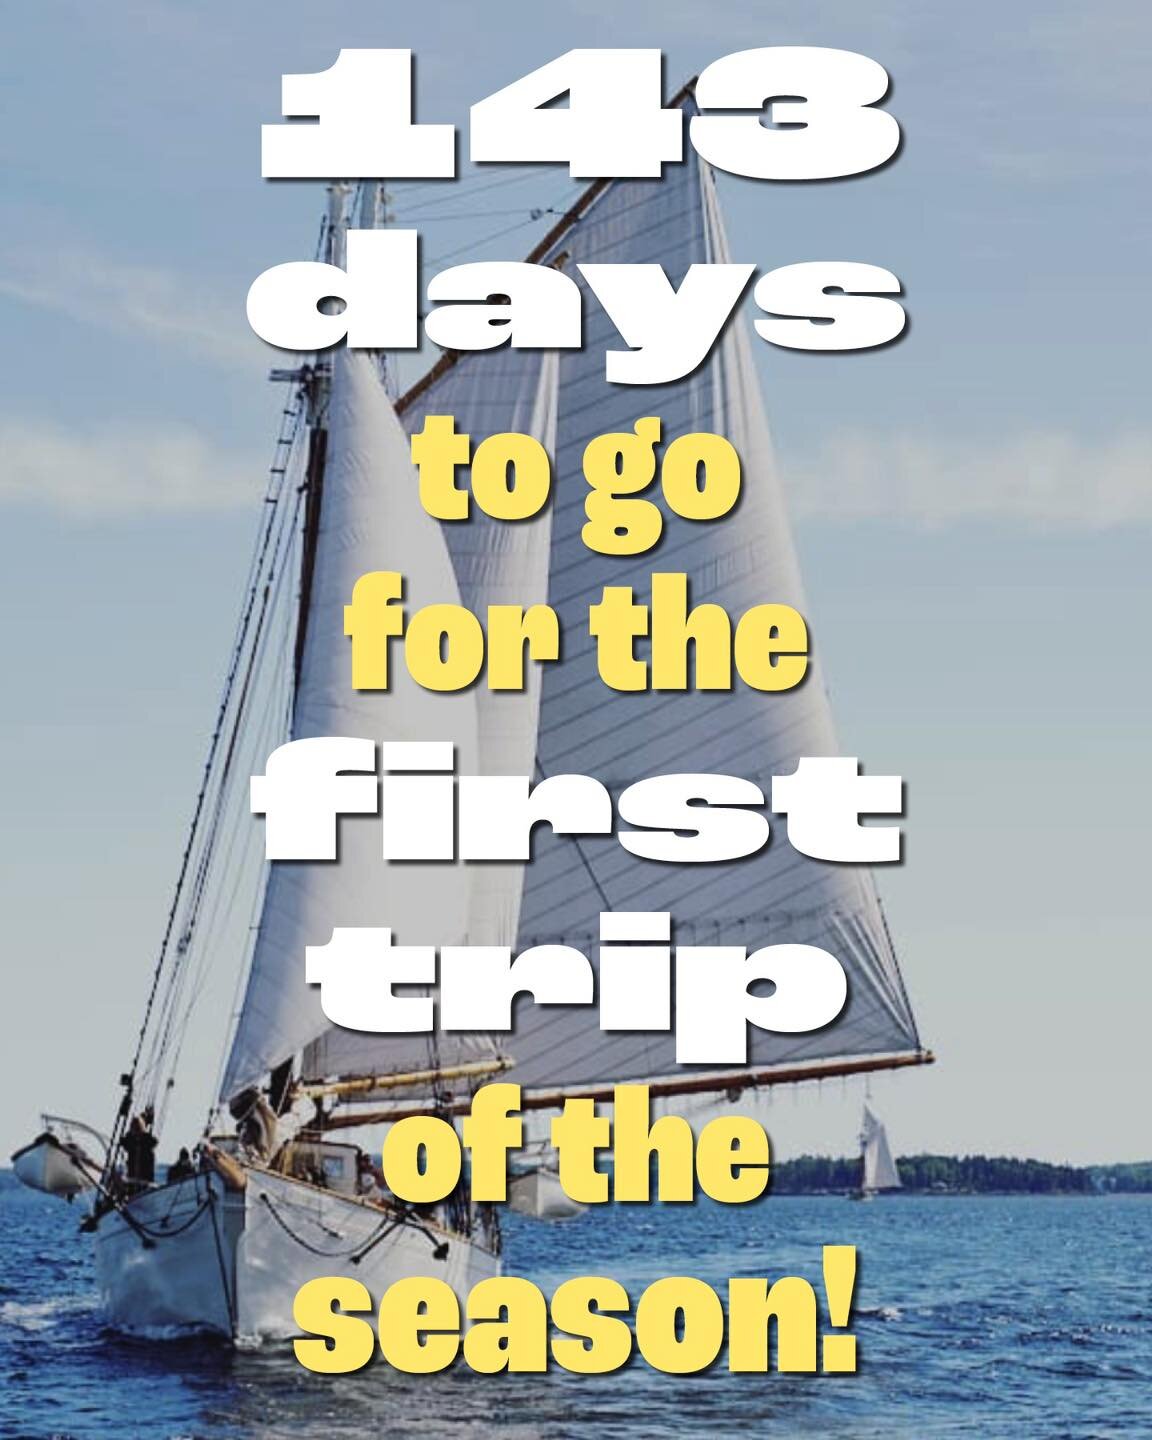 Get ready to #sailpenobscotbay! Book your 2024 trip while there&rsquo;s still space available.
https://www.schoonerladona.com/2024-trips-all

#schoonerladona 
#mainelife 
#thisiswindjamming #mainewinjammerassociation